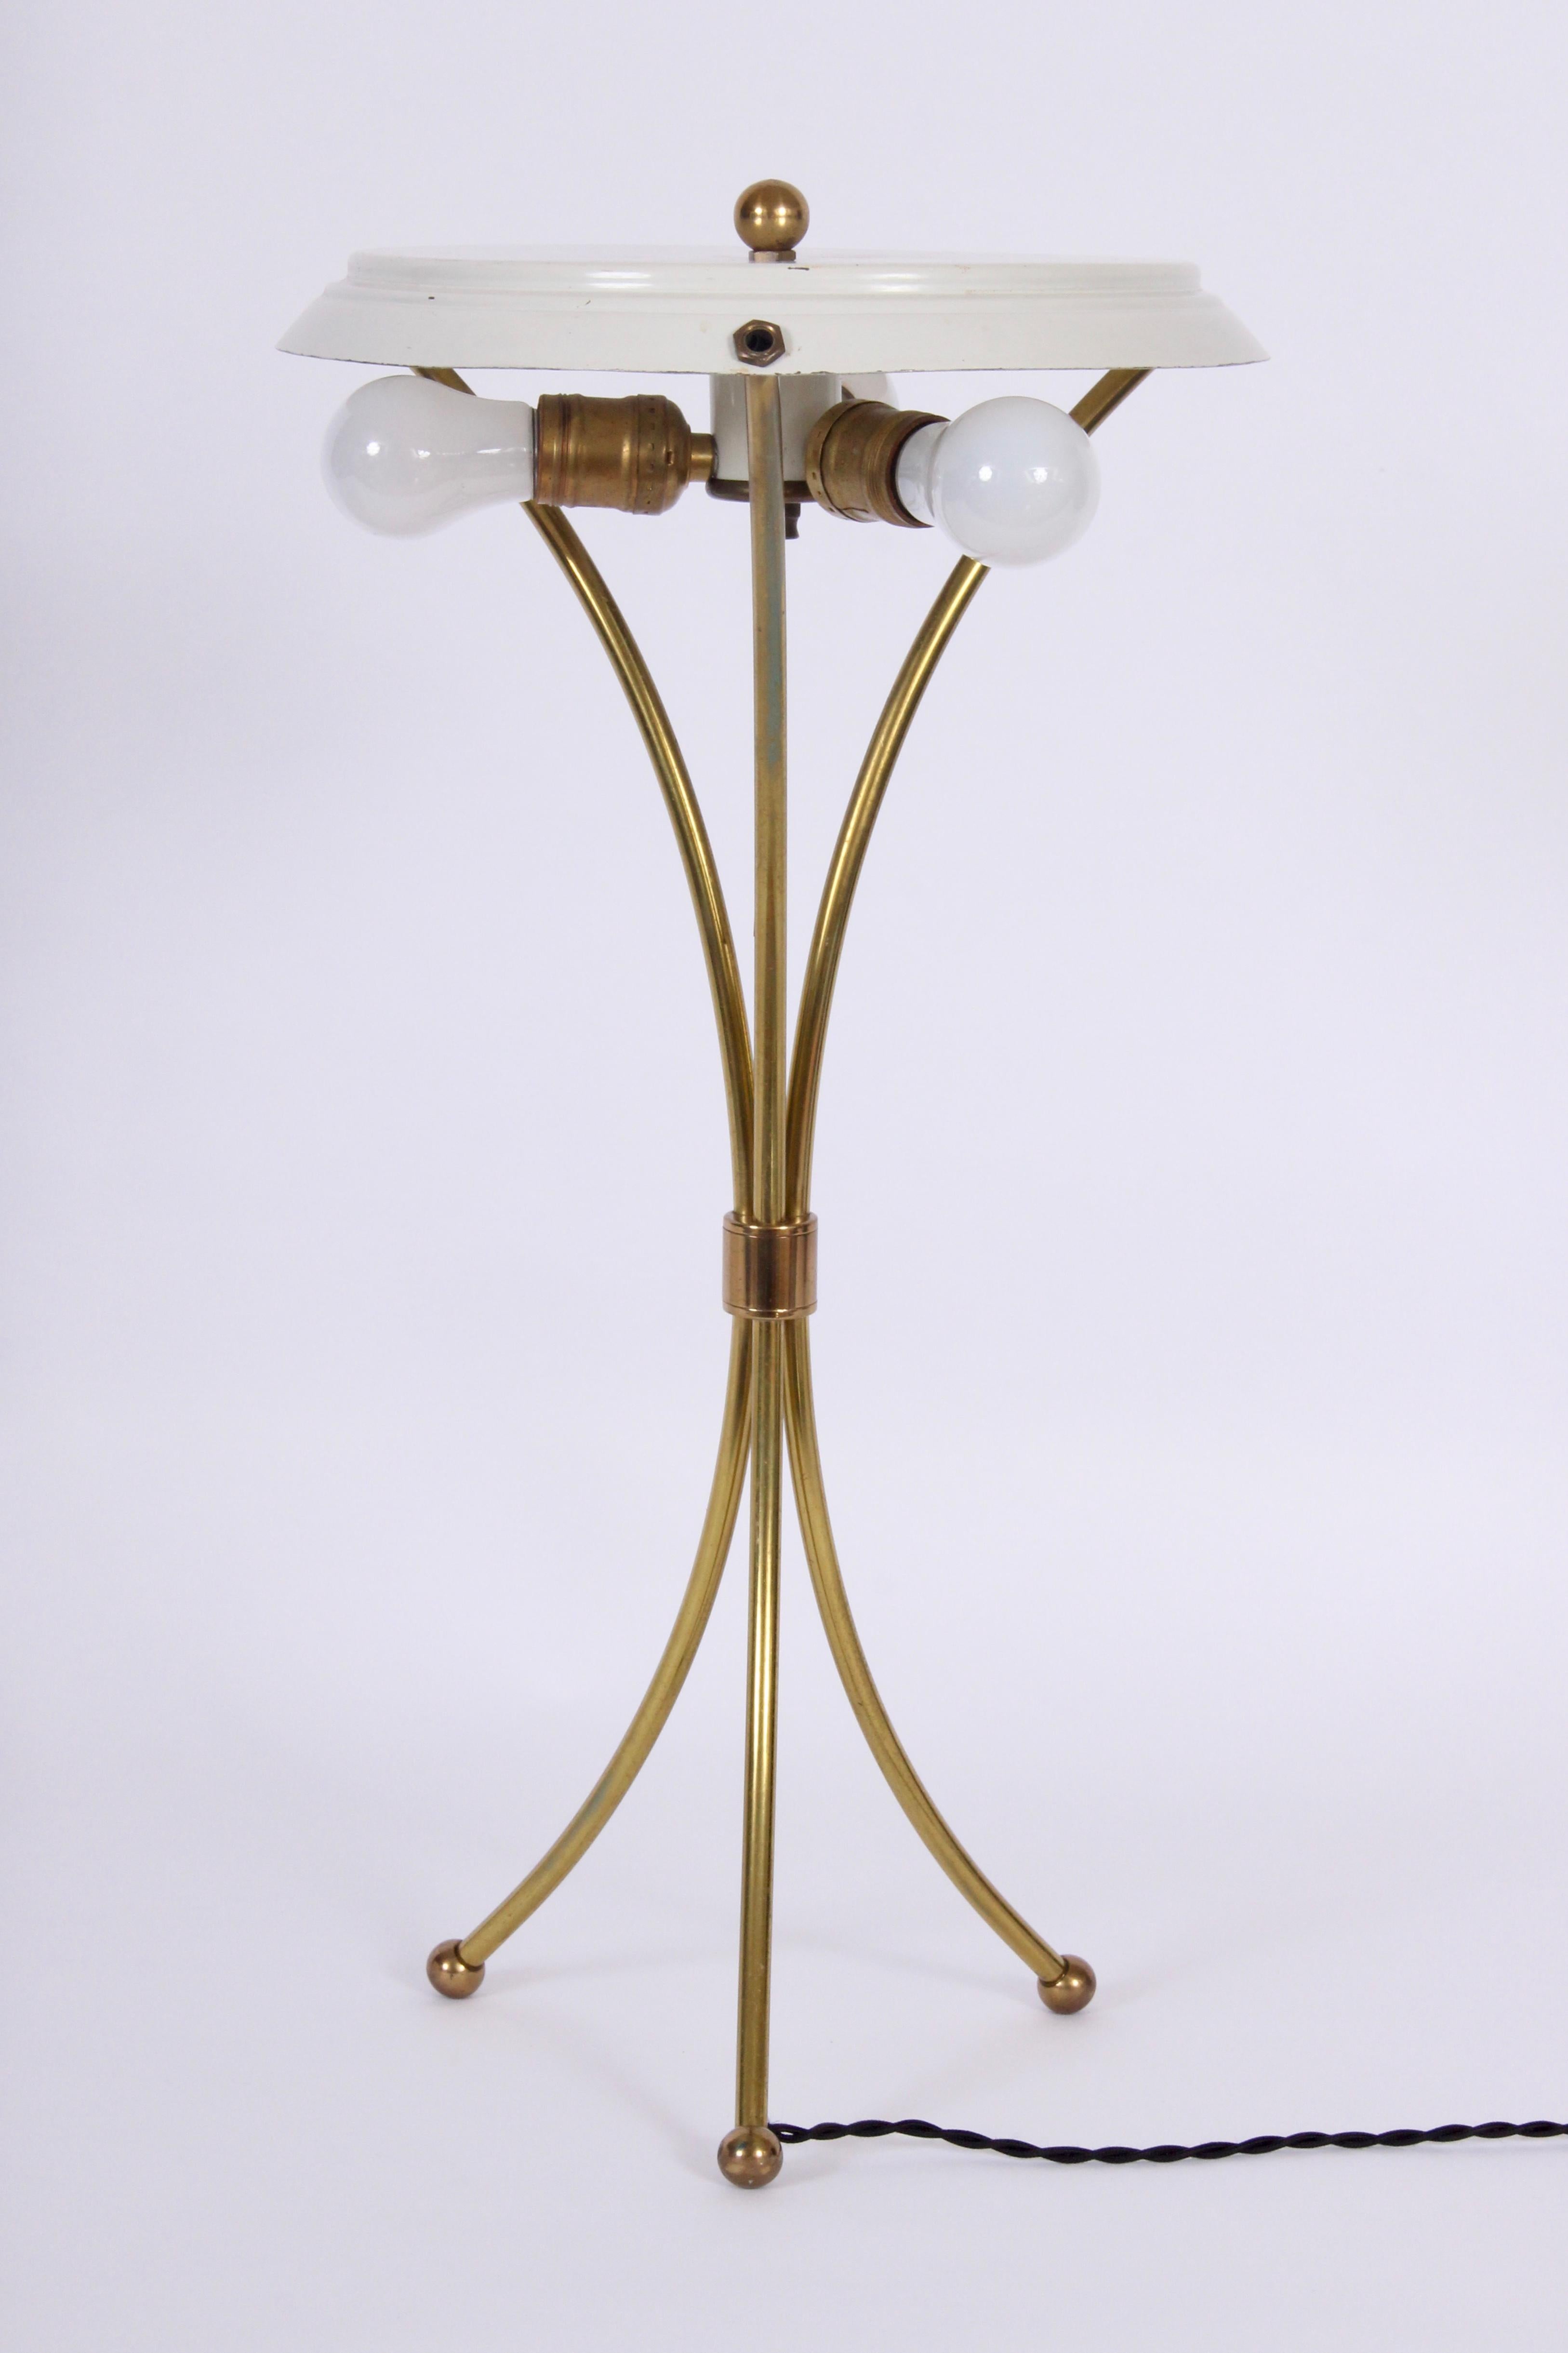 Gerald Thurston arched and clasped brass tripod desk lamp, bedside lamp. Original lamp frame with new white linen. Shade measures (6 H x 12 D top x 14 D bottom). Base 8D. Triple sockets. Pull chain. Up to 60 watts per socket, late 1940s-1950s.